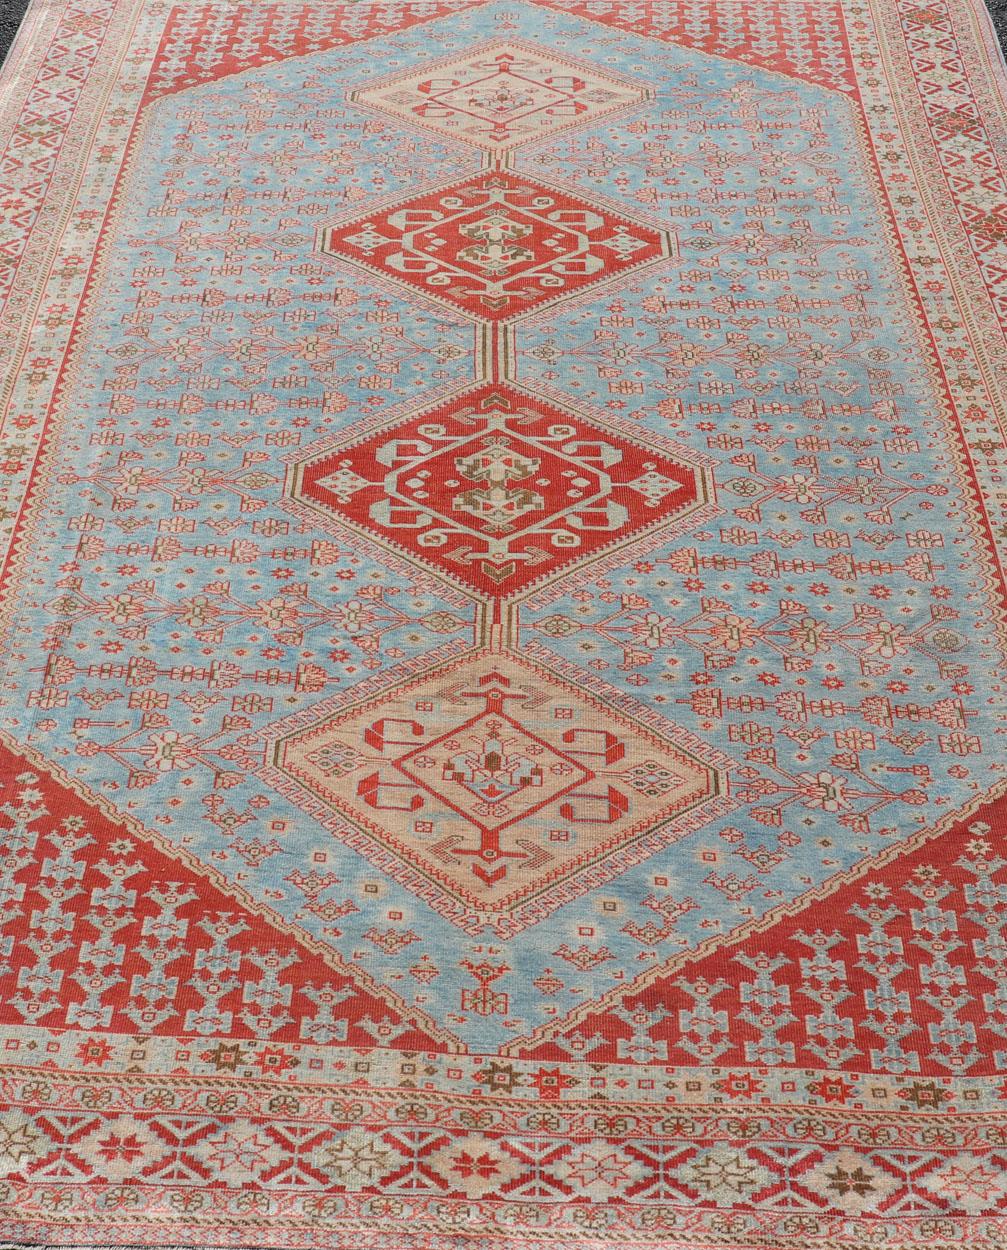 Wool Antique Persian Qashqai Shiraz Tribal Rug with Latch Hooked Diamond Design For Sale